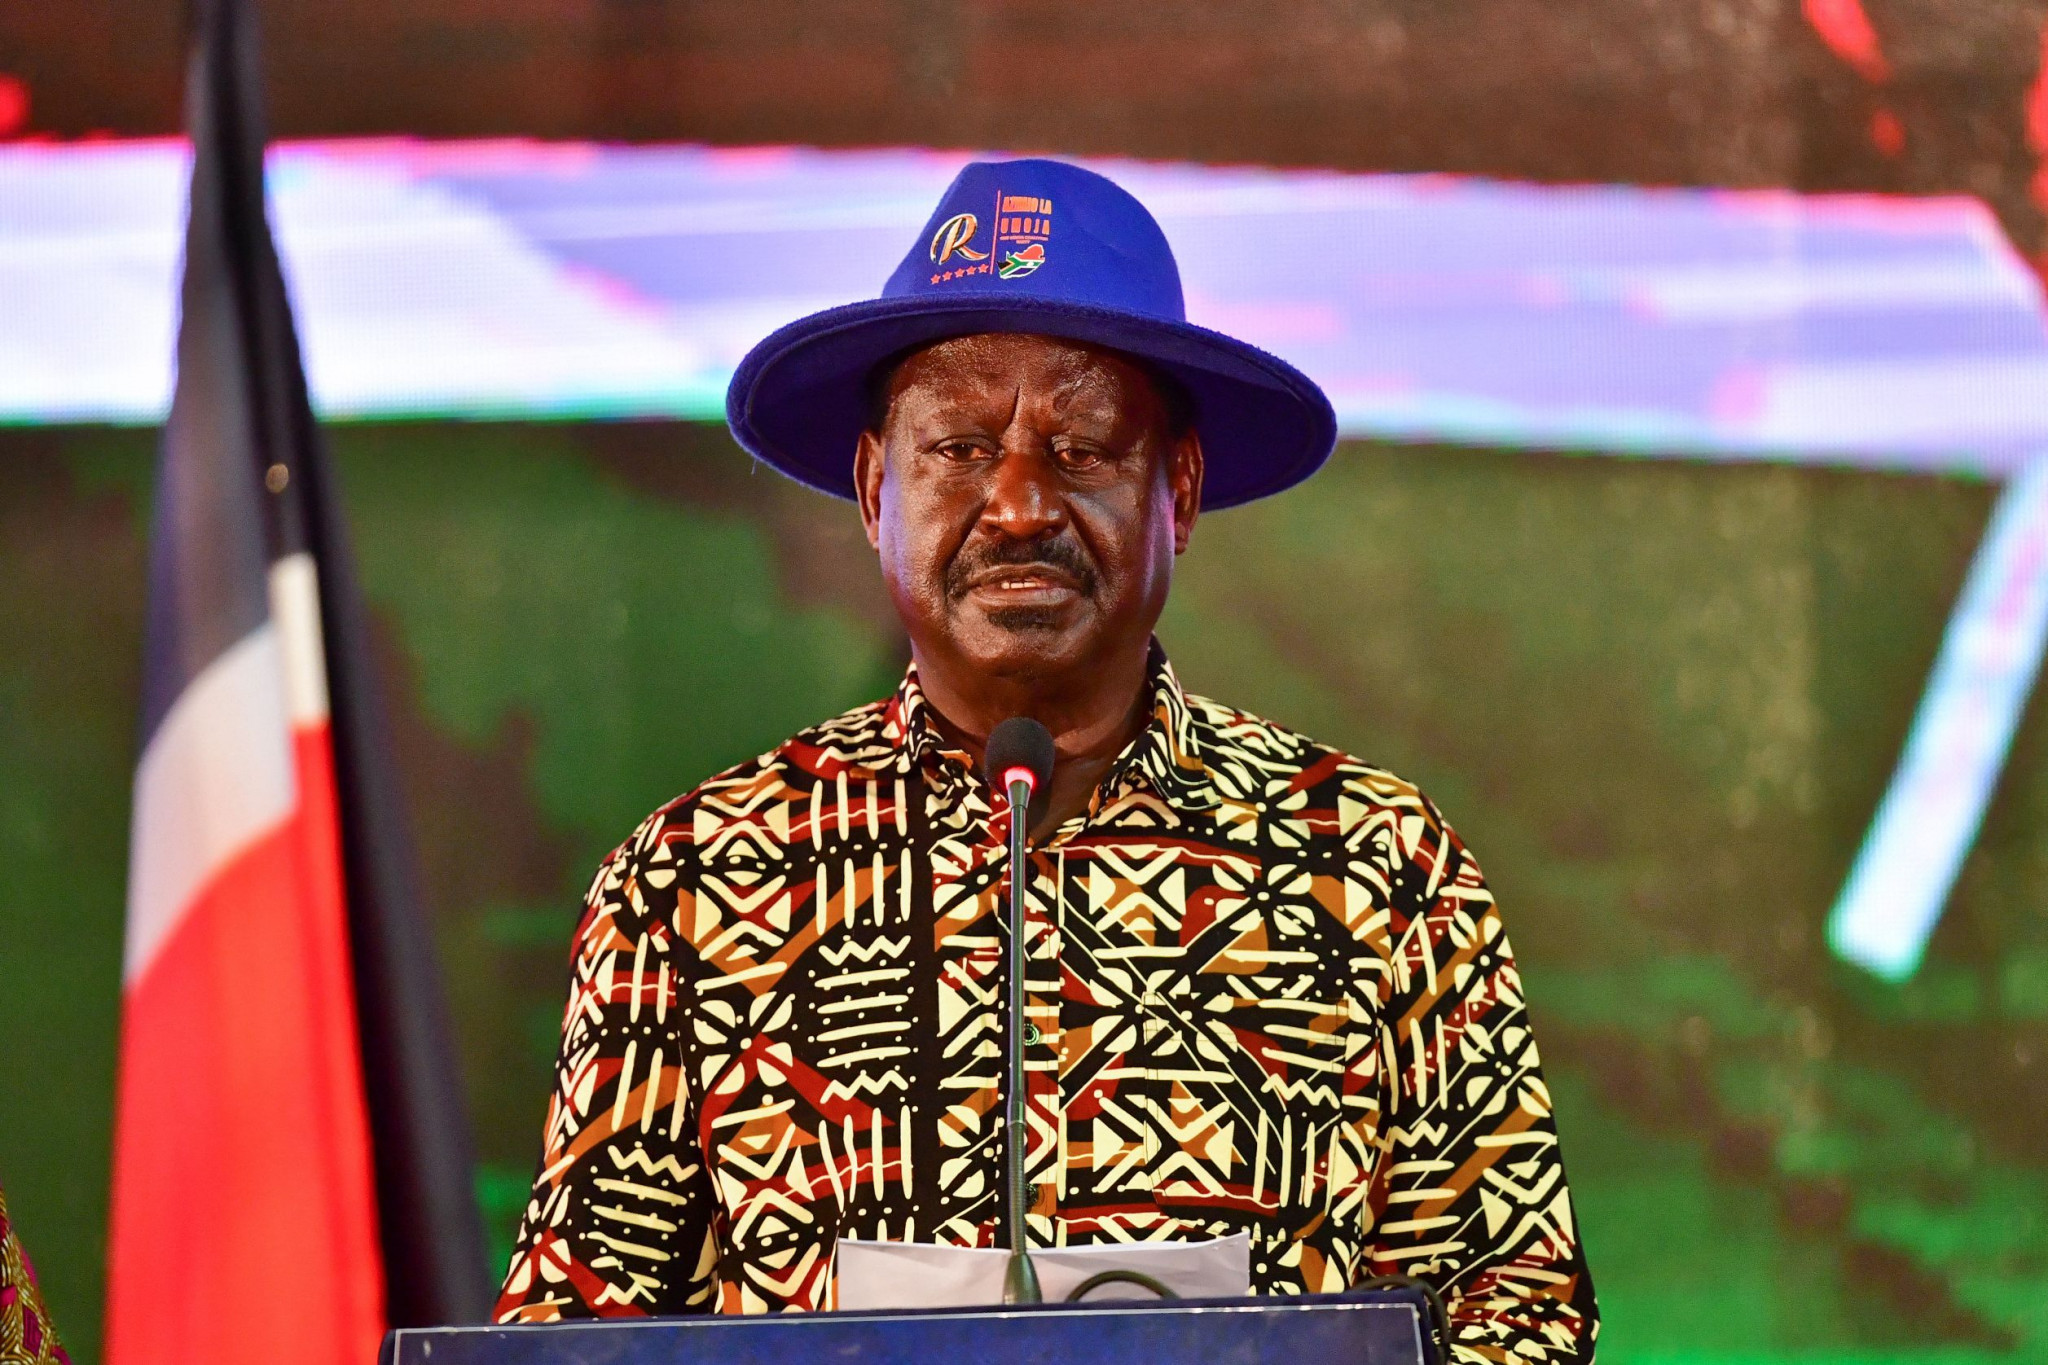 Ruto's rival Raila Odinga had claimed the results of Kenya's Presidential election were fraudulent, but these claims were dismissed by the country's Supreme Court ©Getty Images